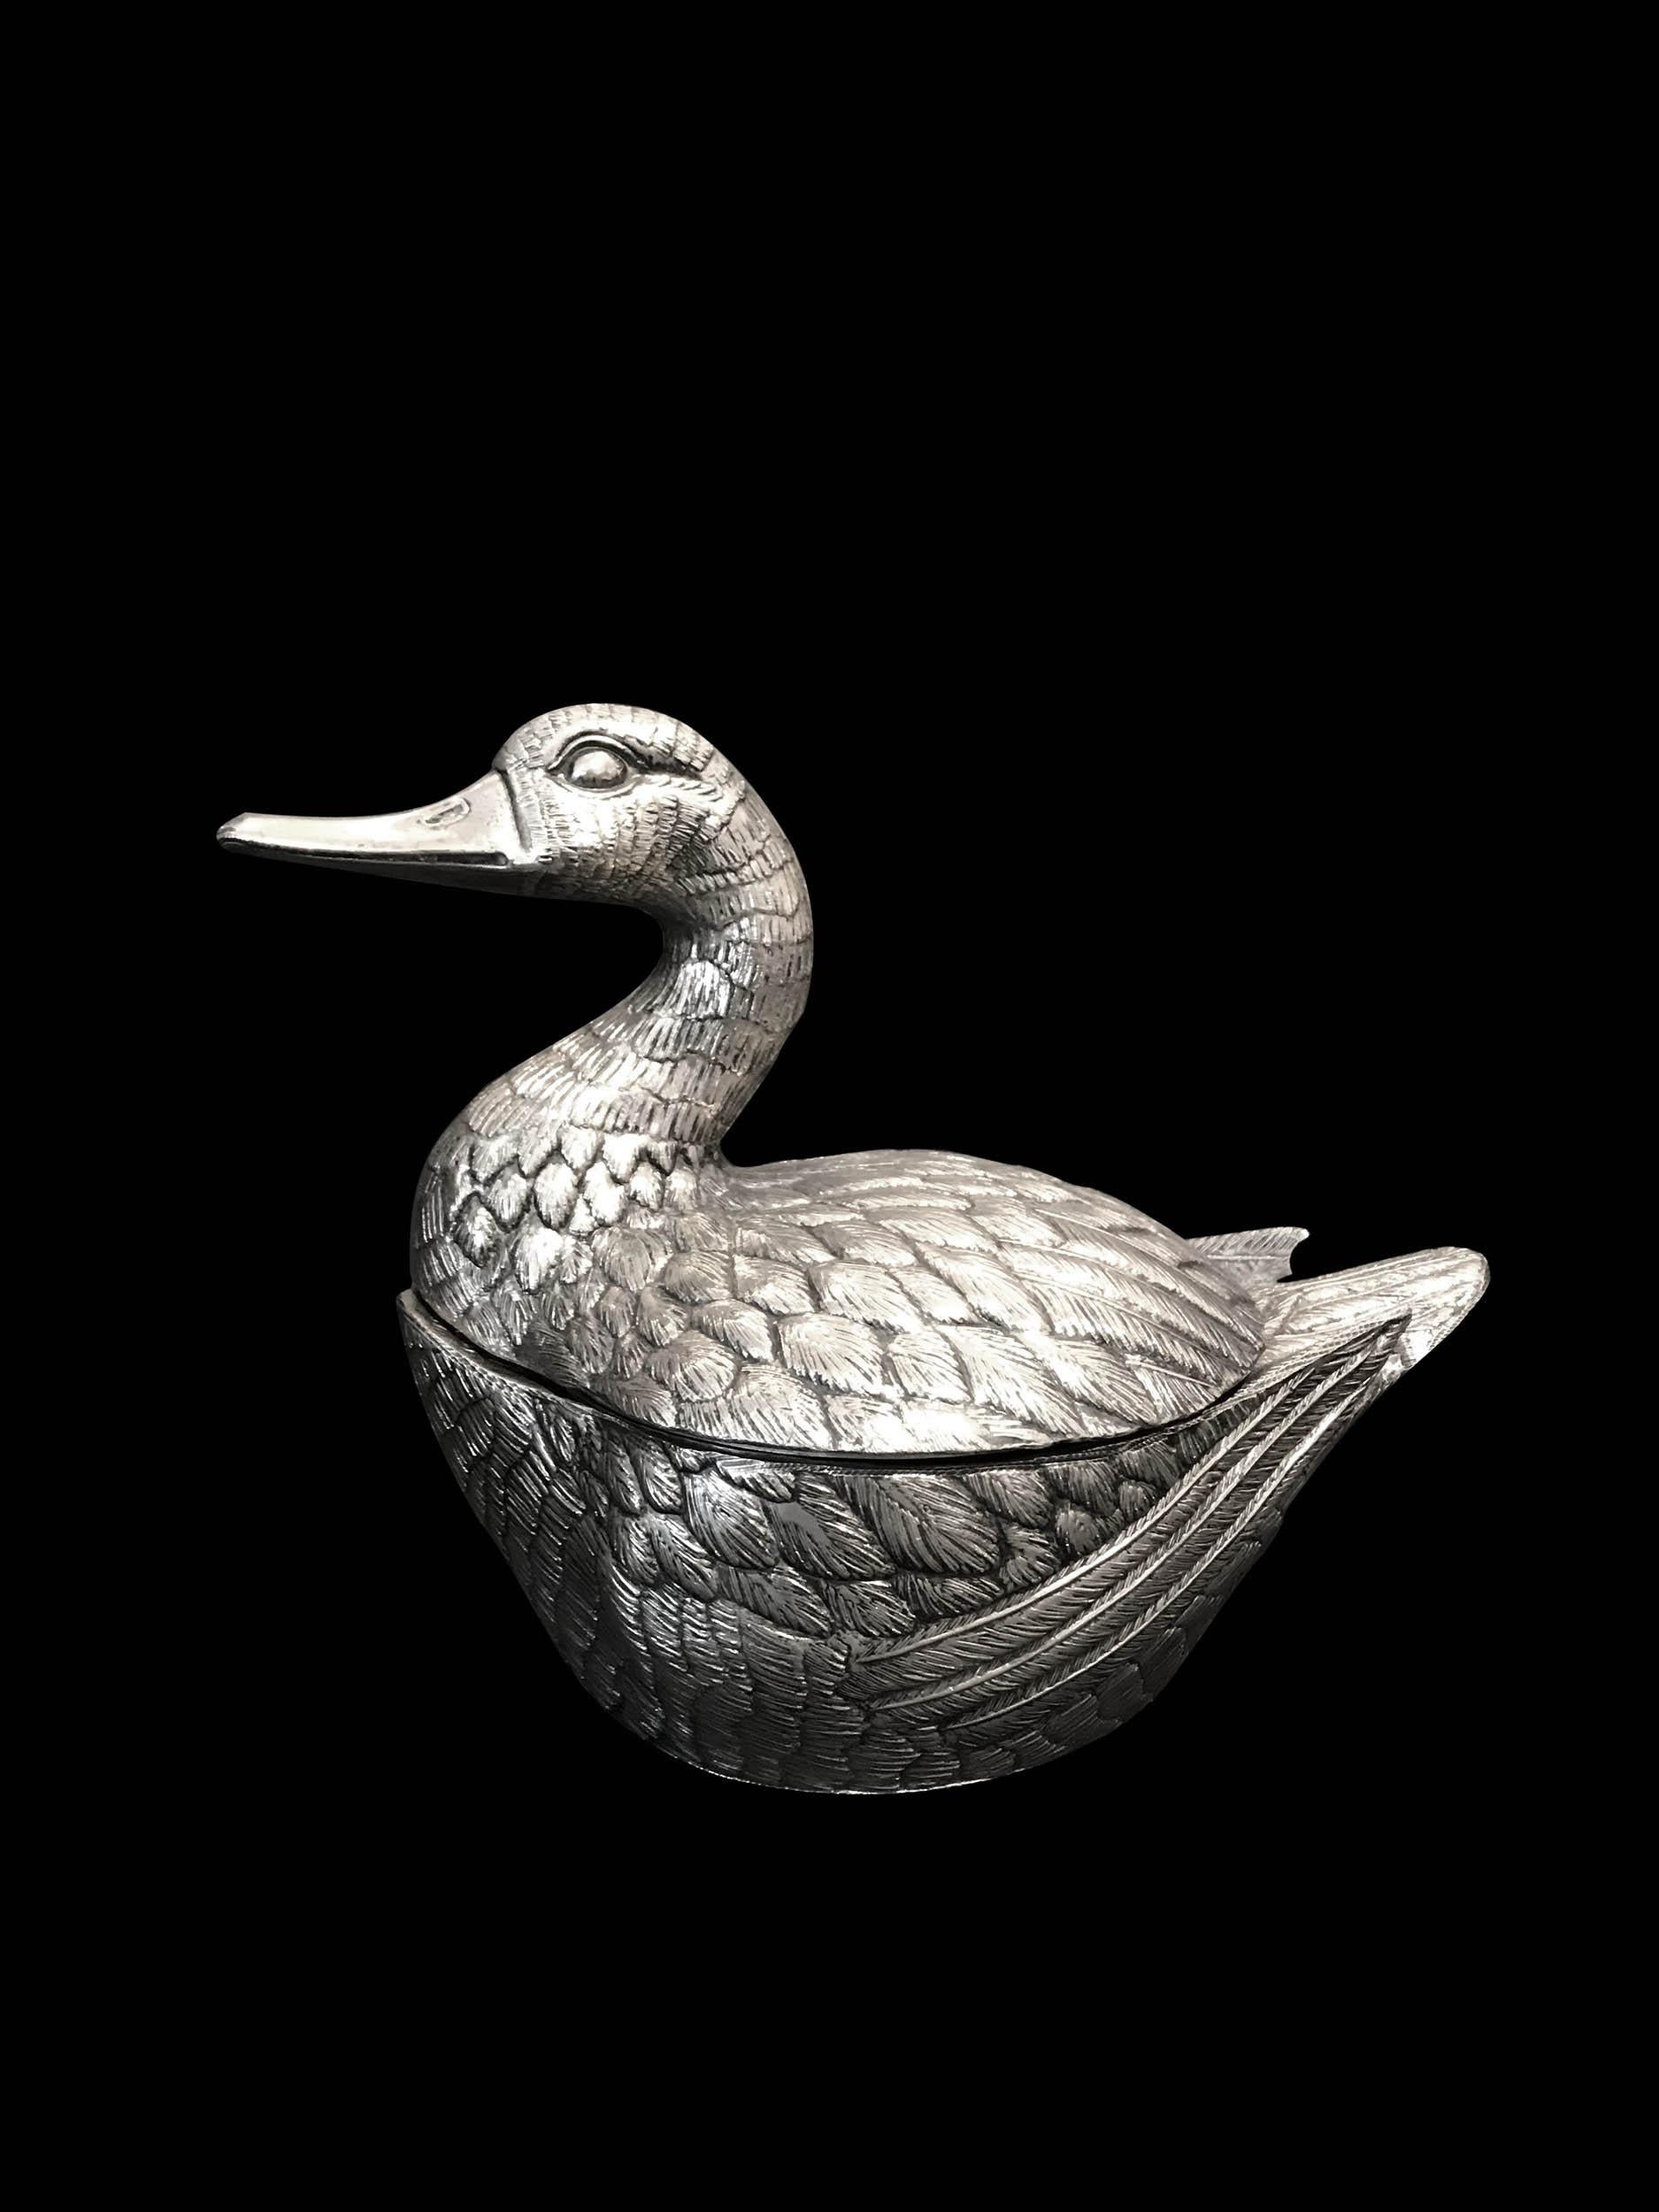 This duck ice bucket was designed by Mauro Manetti circa 1960. 
The original and first productions, like this one, had the inside made of metal and the outside of silvered cast aluminum which is silver plated.
Mark on one side of the tail 